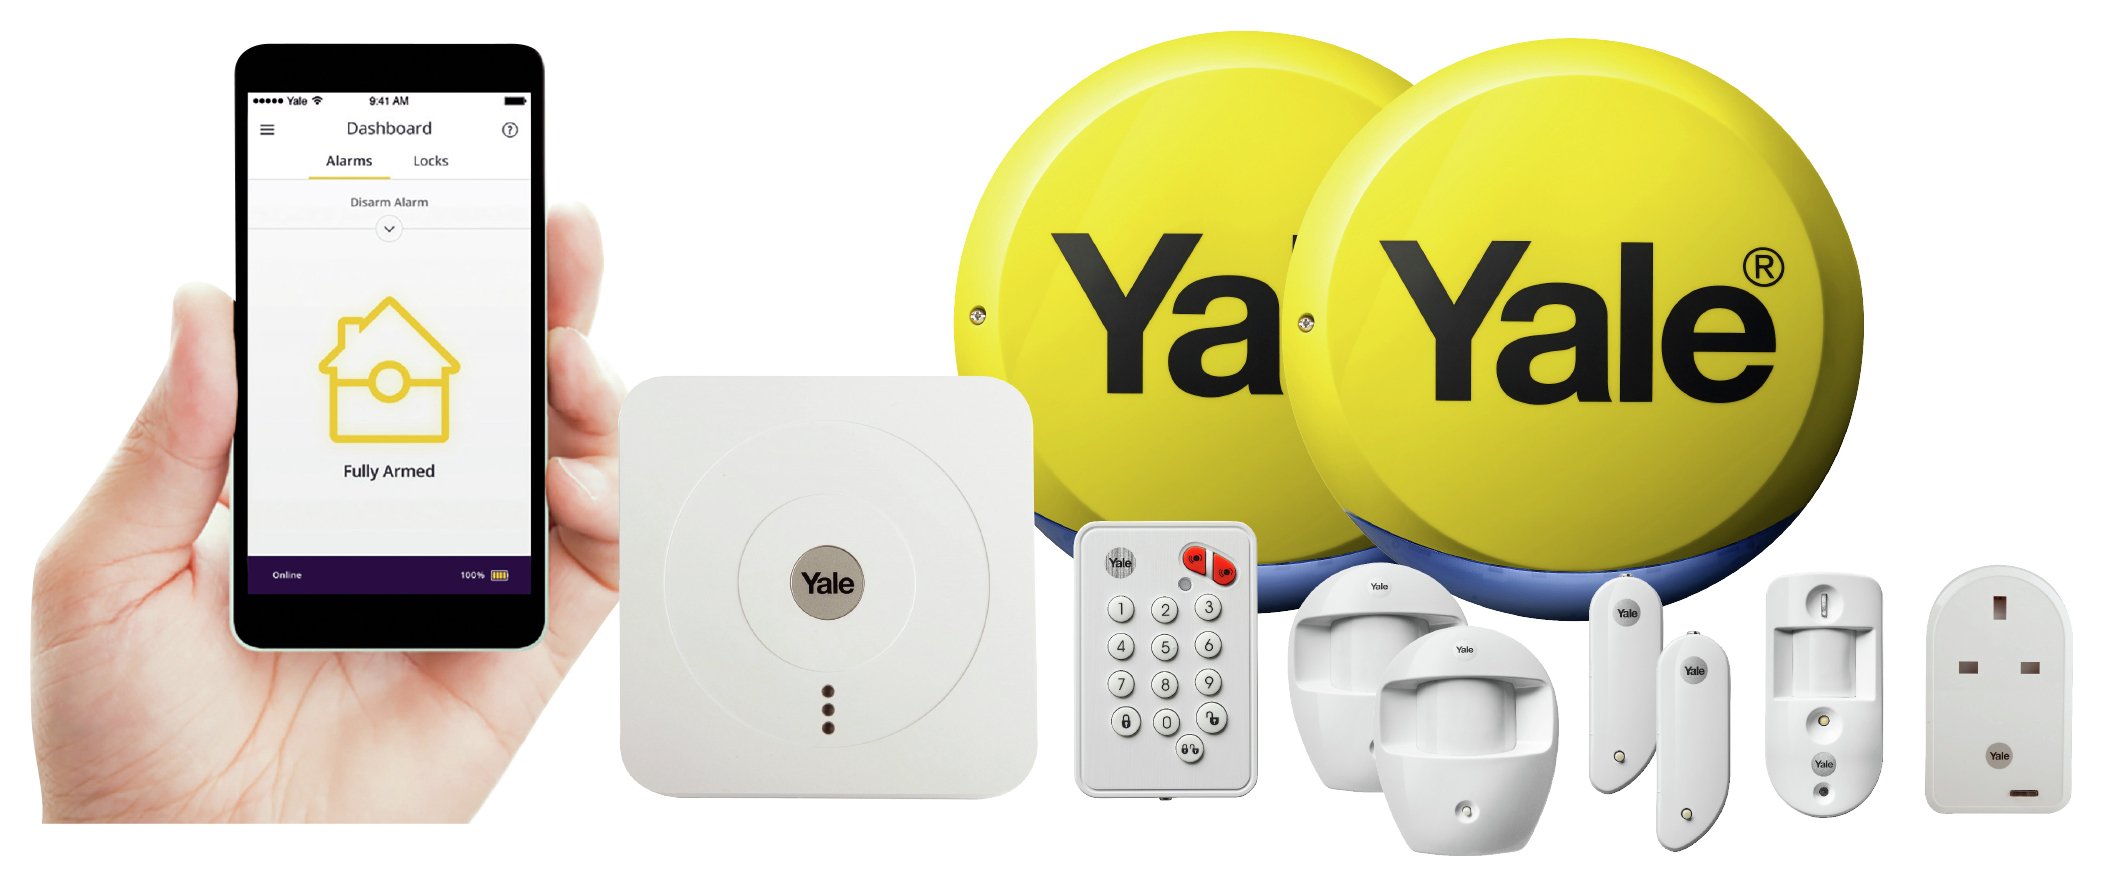 Yale Smart Home Alarm, View & Control Kit